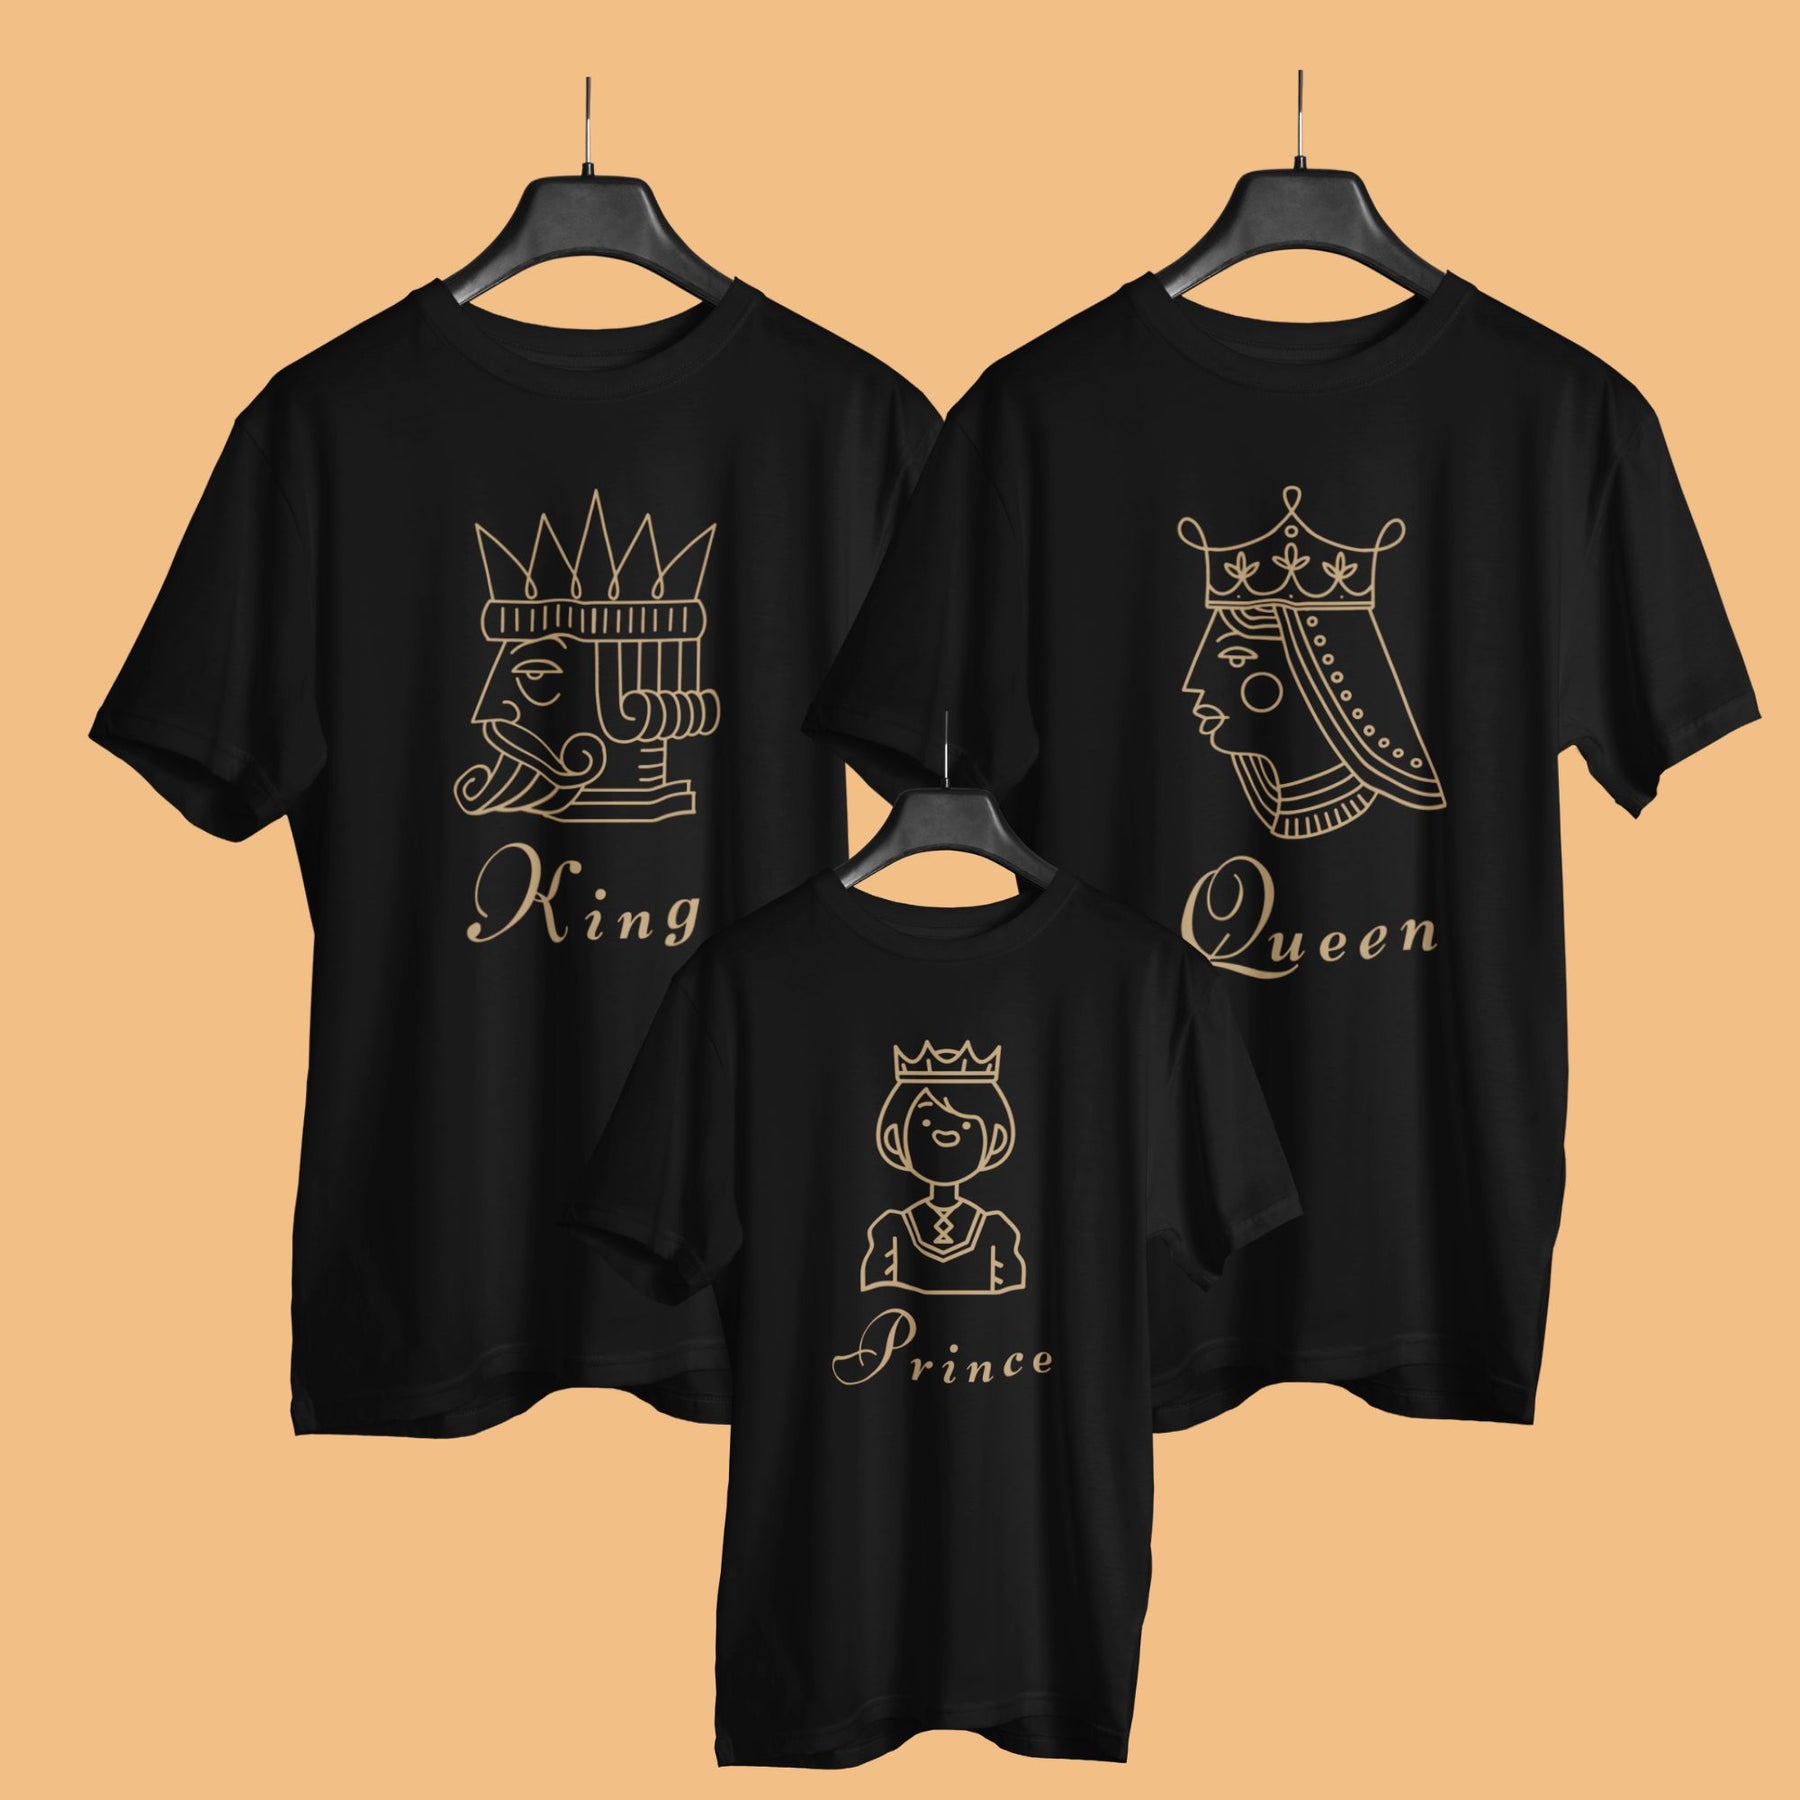 king-queen-prince-matching-family-black-t-shirts-for-mom-dad-daughter-gogirgit-hanger